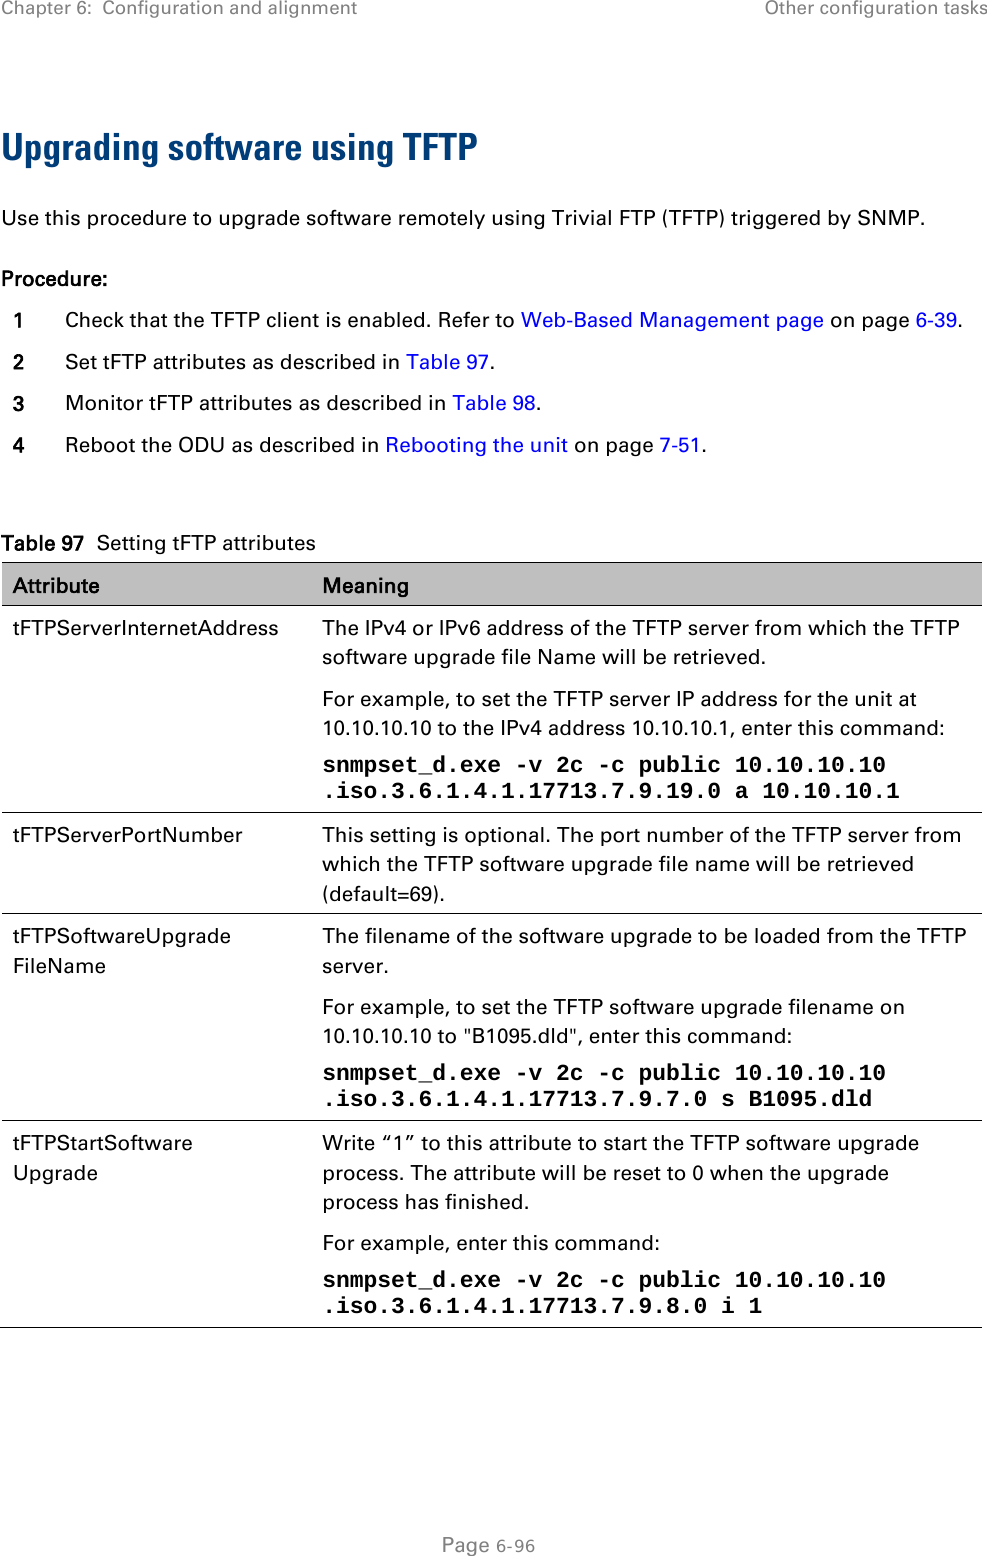 Chapter 6:  Configuration and alignment Other configuration tasks  Upgrading software using TFTP Use this procedure to upgrade software remotely using Trivial FTP (TFTP) triggered by SNMP. Procedure: 1 Check that the TFTP client is enabled. Refer to Web-Based Management page on page 6-39. 2 Set tFTP attributes as described in Table 97. 3 Monitor tFTP attributes as described in Table 98. 4 Reboot the ODU as described in Rebooting the unit on page 7-51.  Table 97  Setting tFTP attributes Attribute Meaning tFTPServerInternetAddress  The IPv4 or IPv6 address of the TFTP server from which the TFTP software upgrade file Name will be retrieved. For example, to set the TFTP server IP address for the unit at 10.10.10.10 to the IPv4 address 10.10.10.1, enter this command:  snmpset_d.exe -v 2c -c public 10.10.10.10 .iso.3.6.1.4.1.17713.7.9.19.0 a 10.10.10.1  tFTPServerPortNumber This setting is optional. The port number of the TFTP server from which the TFTP software upgrade file name will be retrieved (default=69). tFTPSoftwareUpgrade FileName The filename of the software upgrade to be loaded from the TFTP server. For example, to set the TFTP software upgrade filename on 10.10.10.10 to &quot;B1095.dld&quot;, enter this command: snmpset_d.exe -v 2c -c public 10.10.10.10 .iso.3.6.1.4.1.17713.7.9.7.0 s B1095.dld tFTPStartSoftware Upgrade Write “1” to this attribute to start the TFTP software upgrade process. The attribute will be reset to 0 when the upgrade process has finished. For example, enter this command: snmpset_d.exe -v 2c -c public 10.10.10.10 .iso.3.6.1.4.1.17713.7.9.8.0 i 1   Page 6-96 